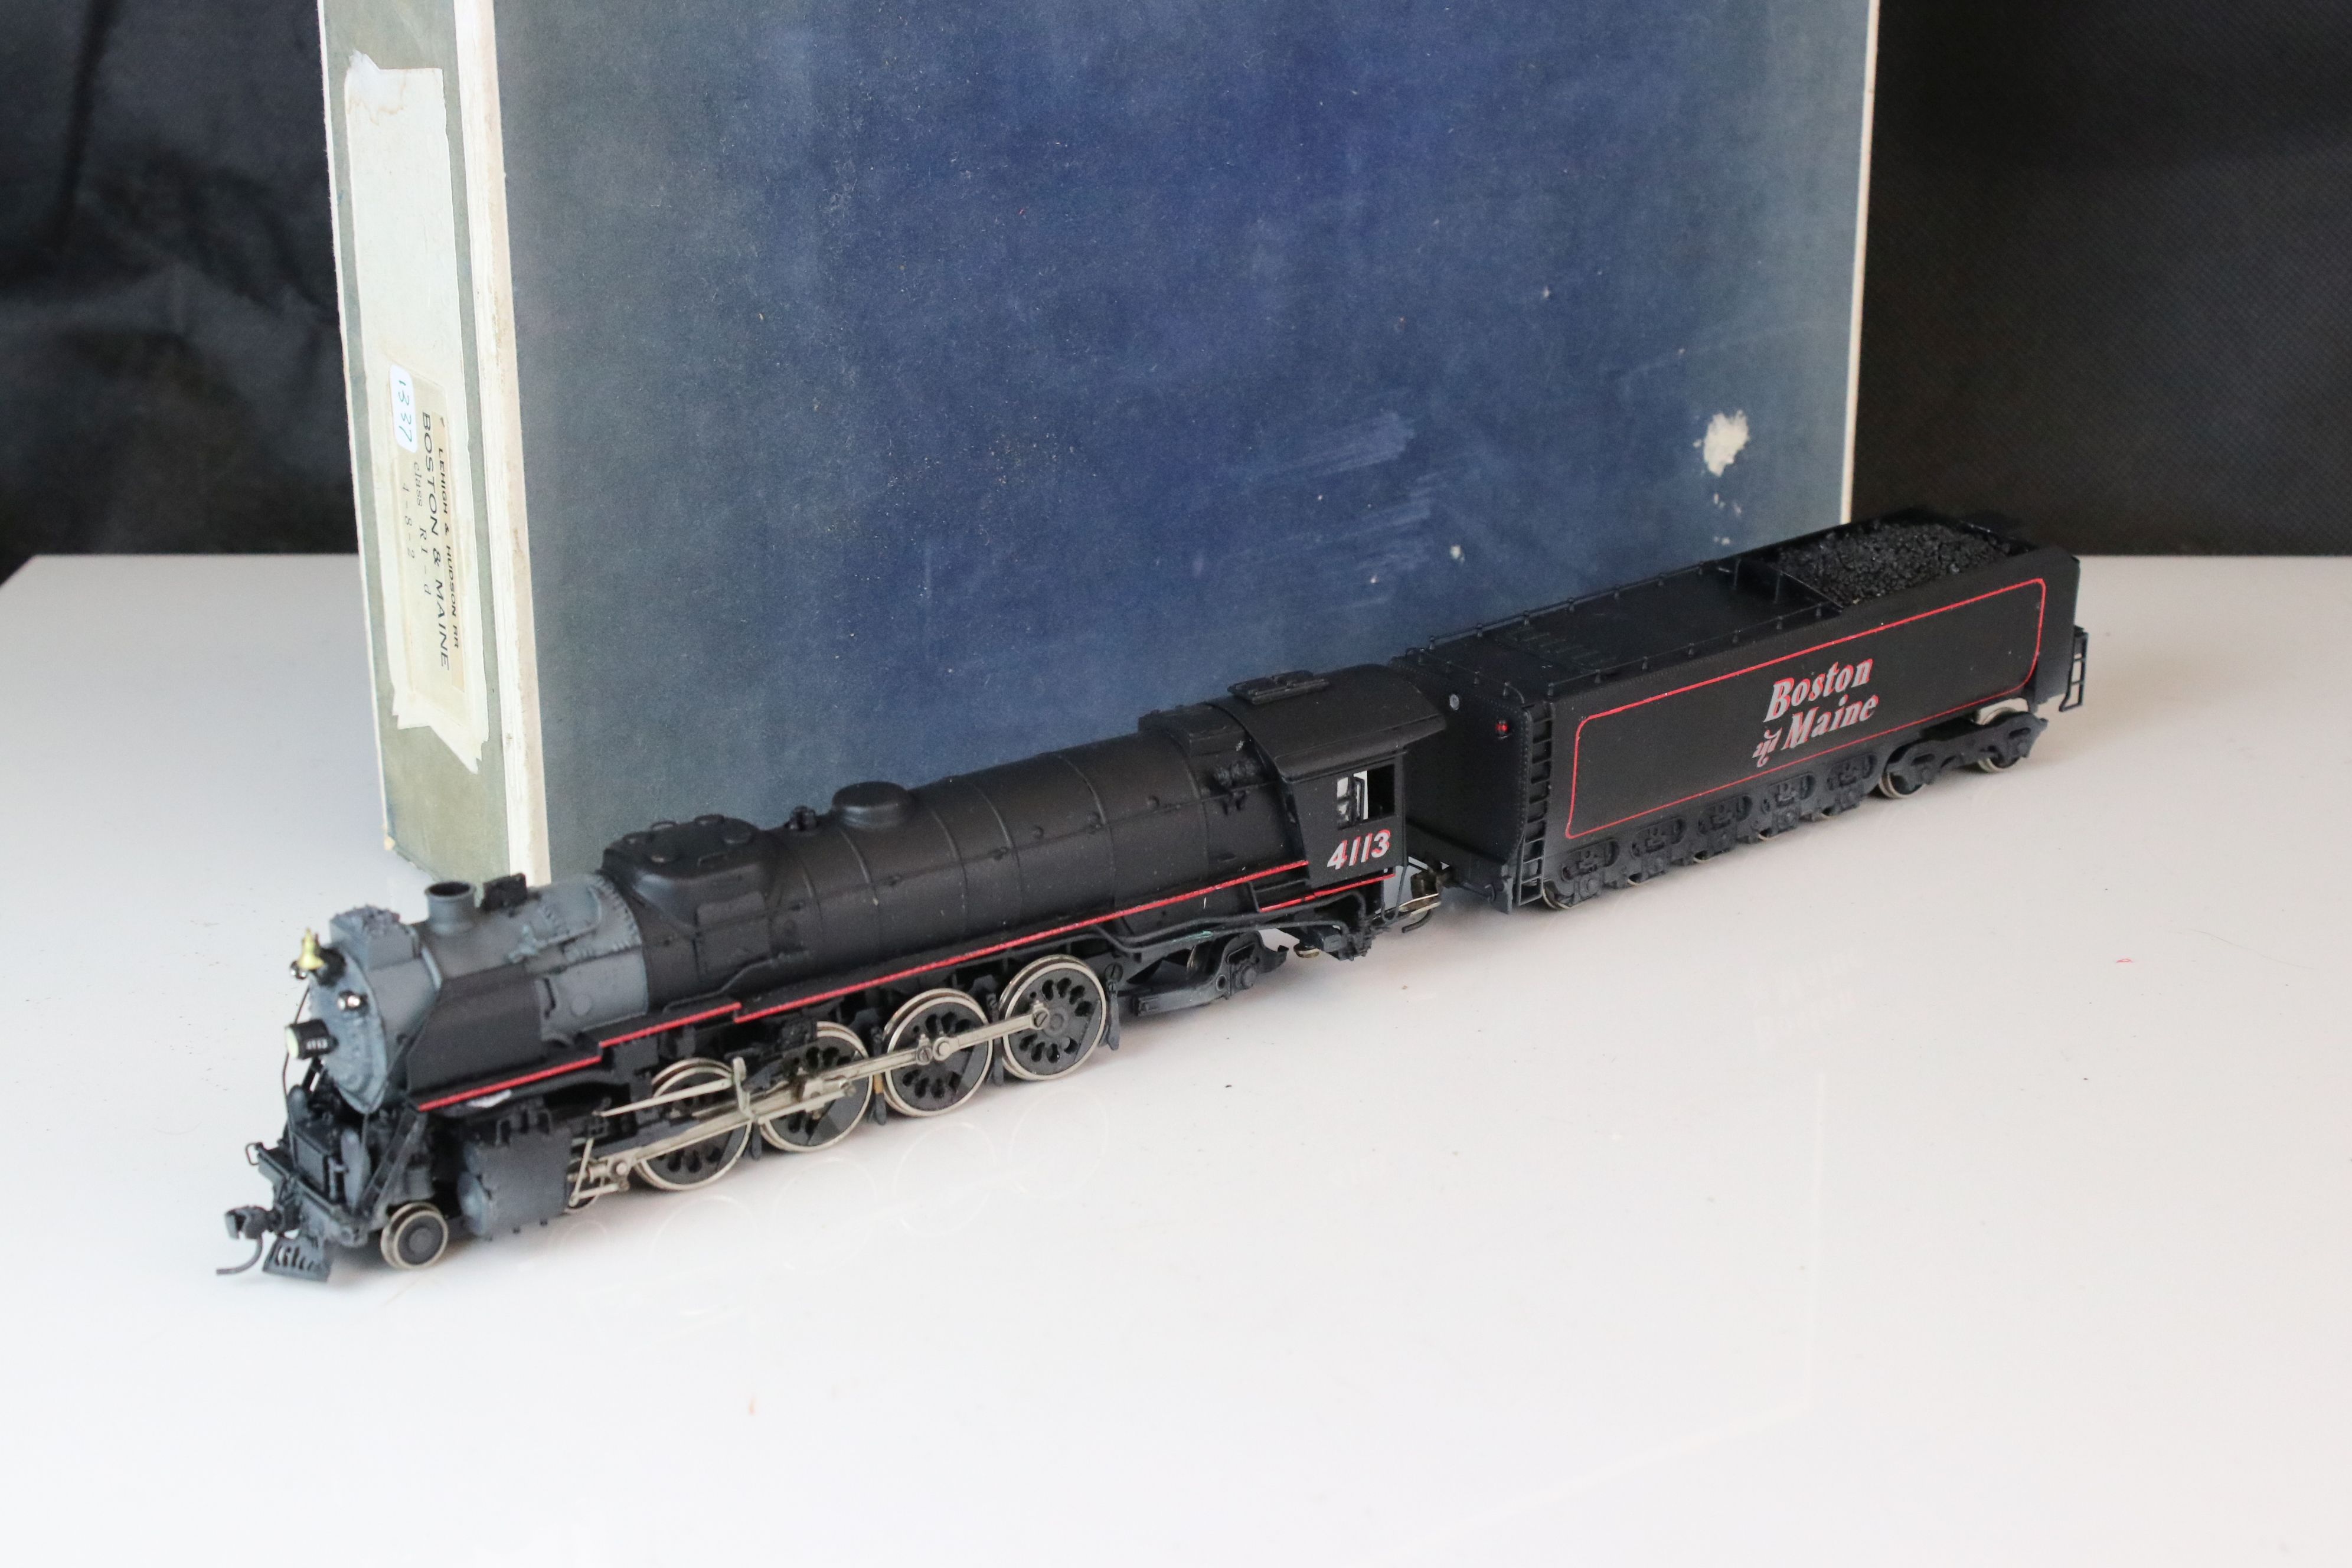 Boxed Olympia HO gauge Boston & Maine Class R1-d 4-8-2 4113 locomotive & tender, painted,